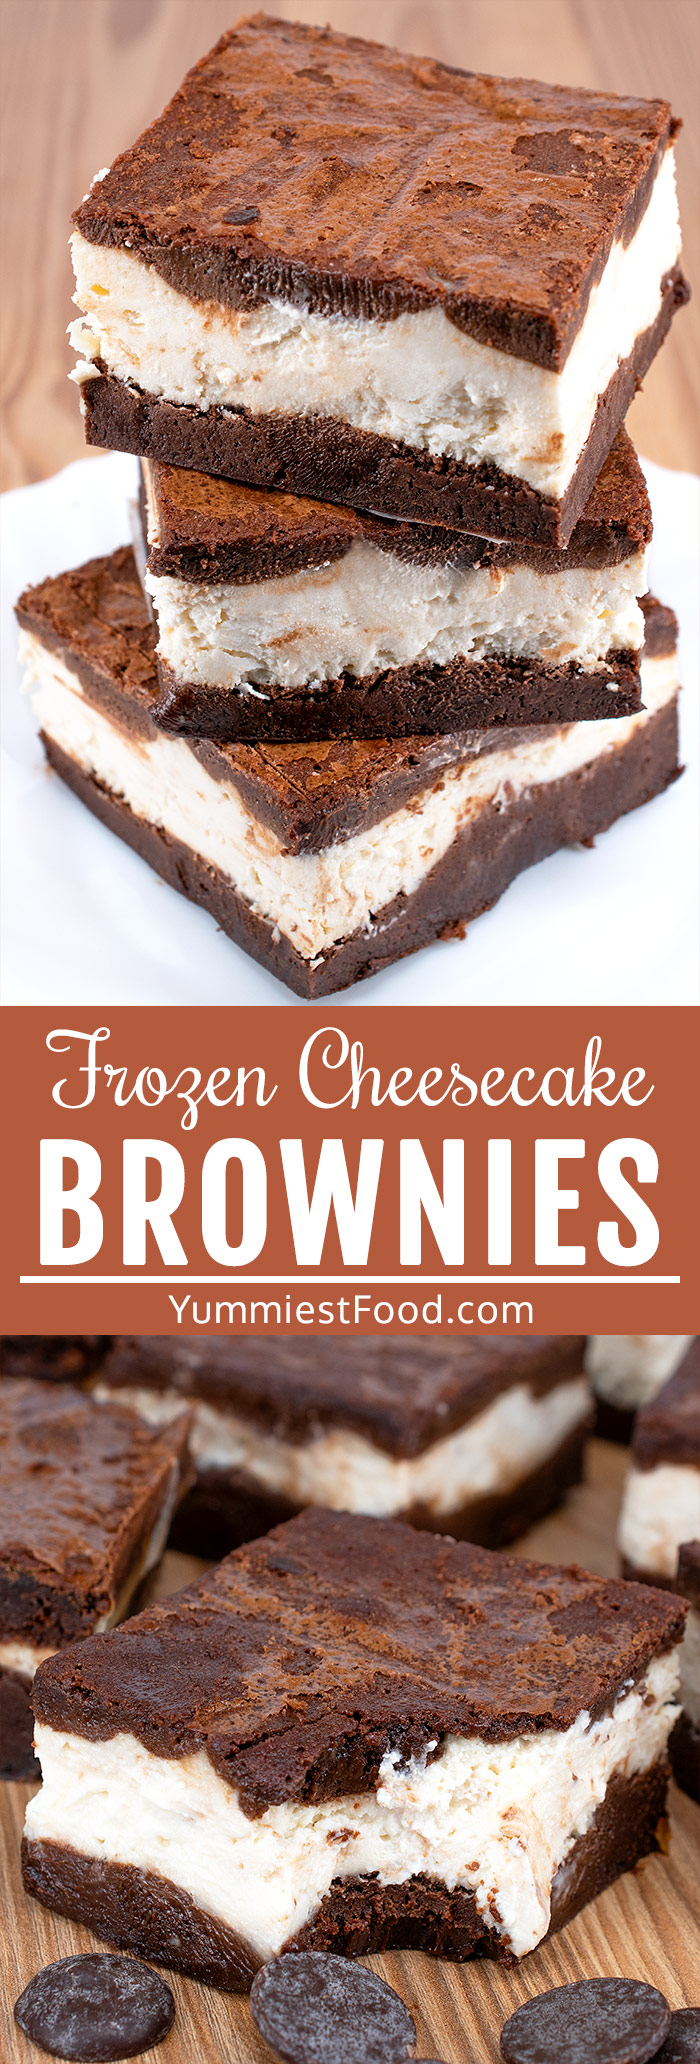 Best Ever Frozen Cheesecake Brownies - scrumptiously rich and very fudgy, that have a creamy cheesecake layer in the middle